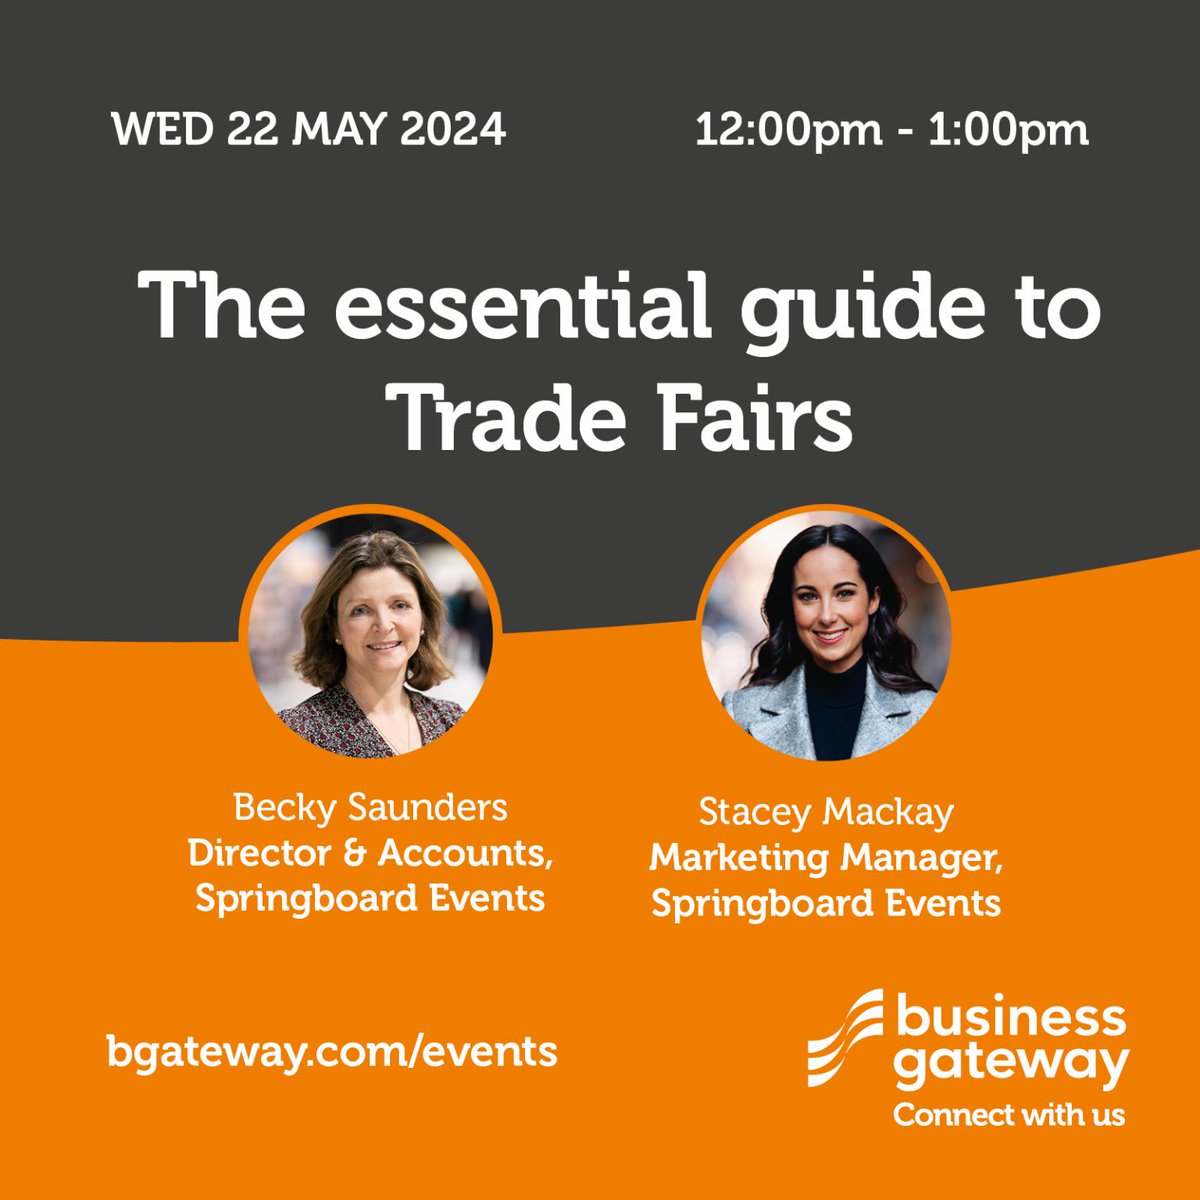 The essential guide to Trade Fairs Thinking about selling wholesale via trade shows? Understand what’s involved • How to choose your stand • setting up • Pricing and marketing yourself • Navigating contracts to follow up ow.ly/ROzF50RIfJa